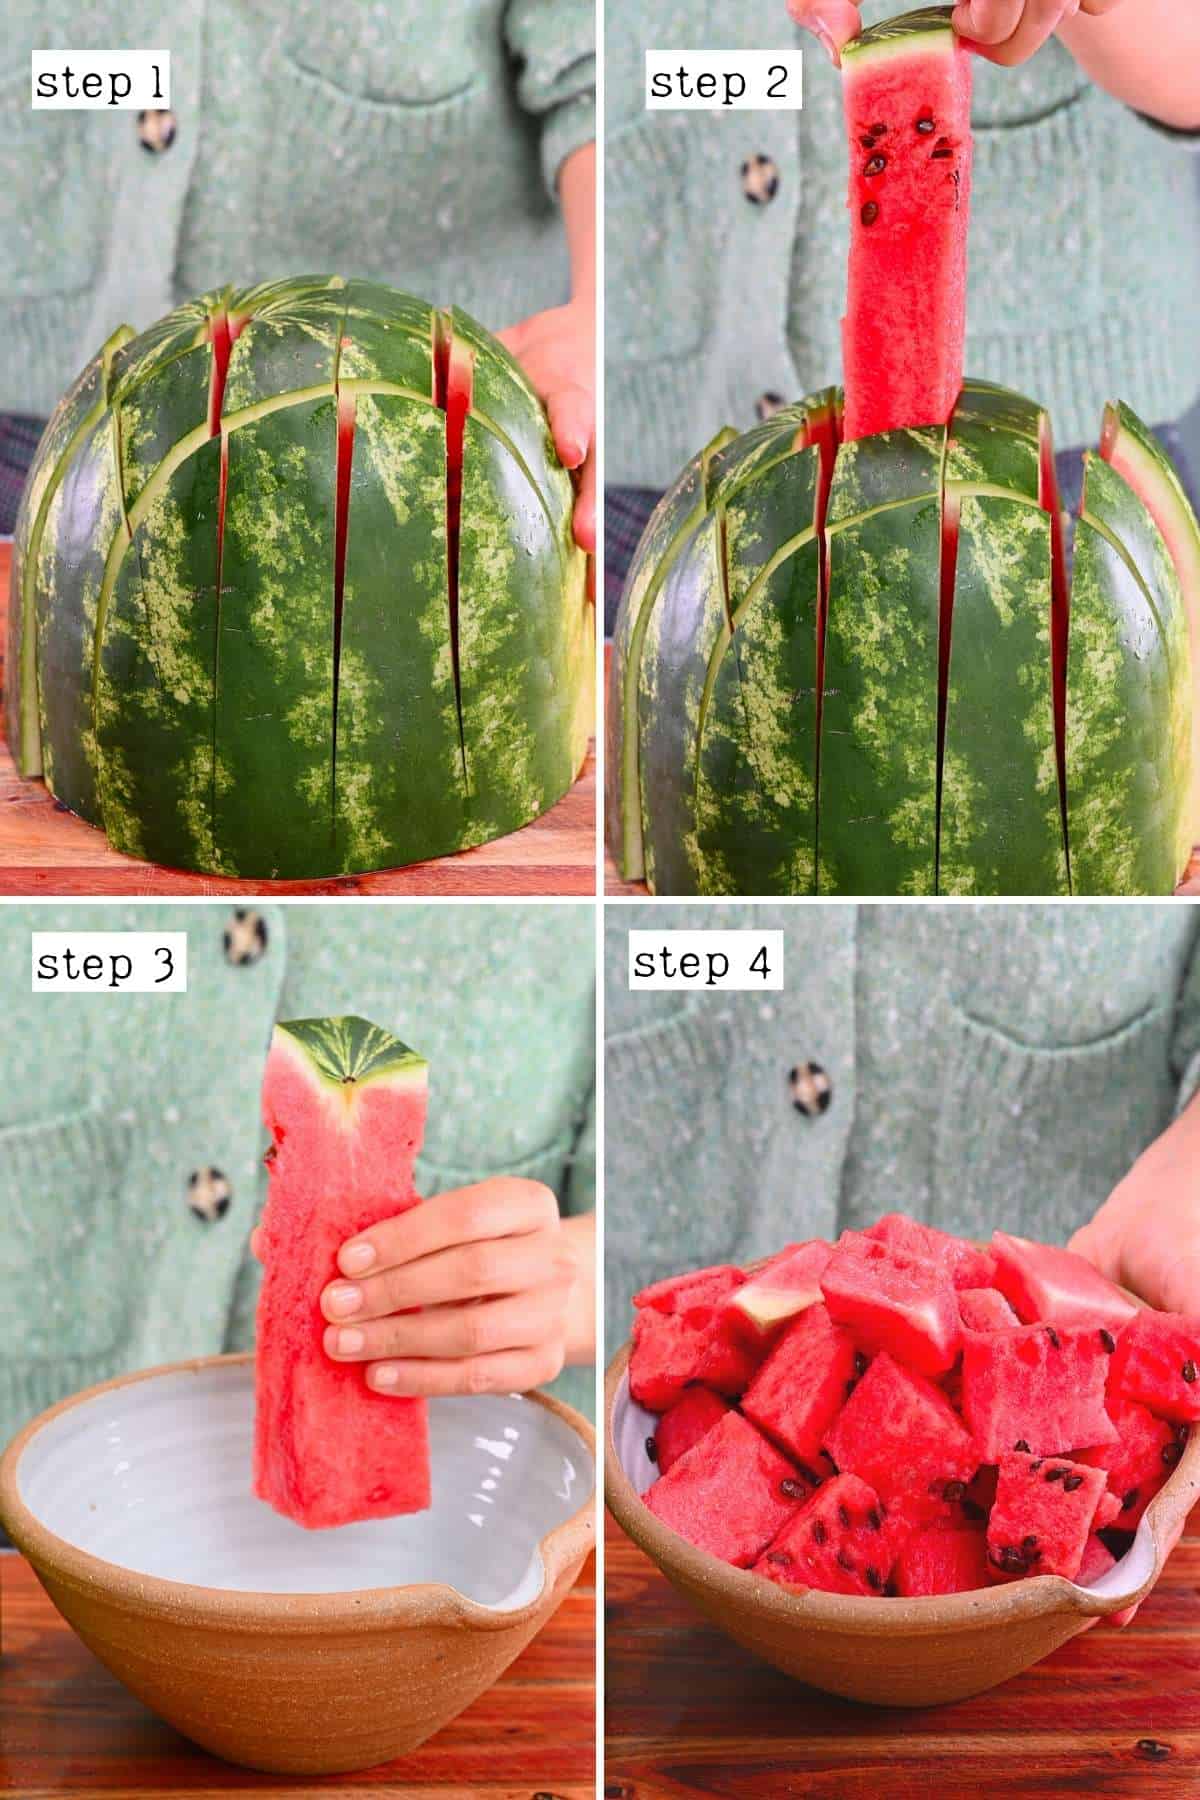 Steps for cutting watermelon